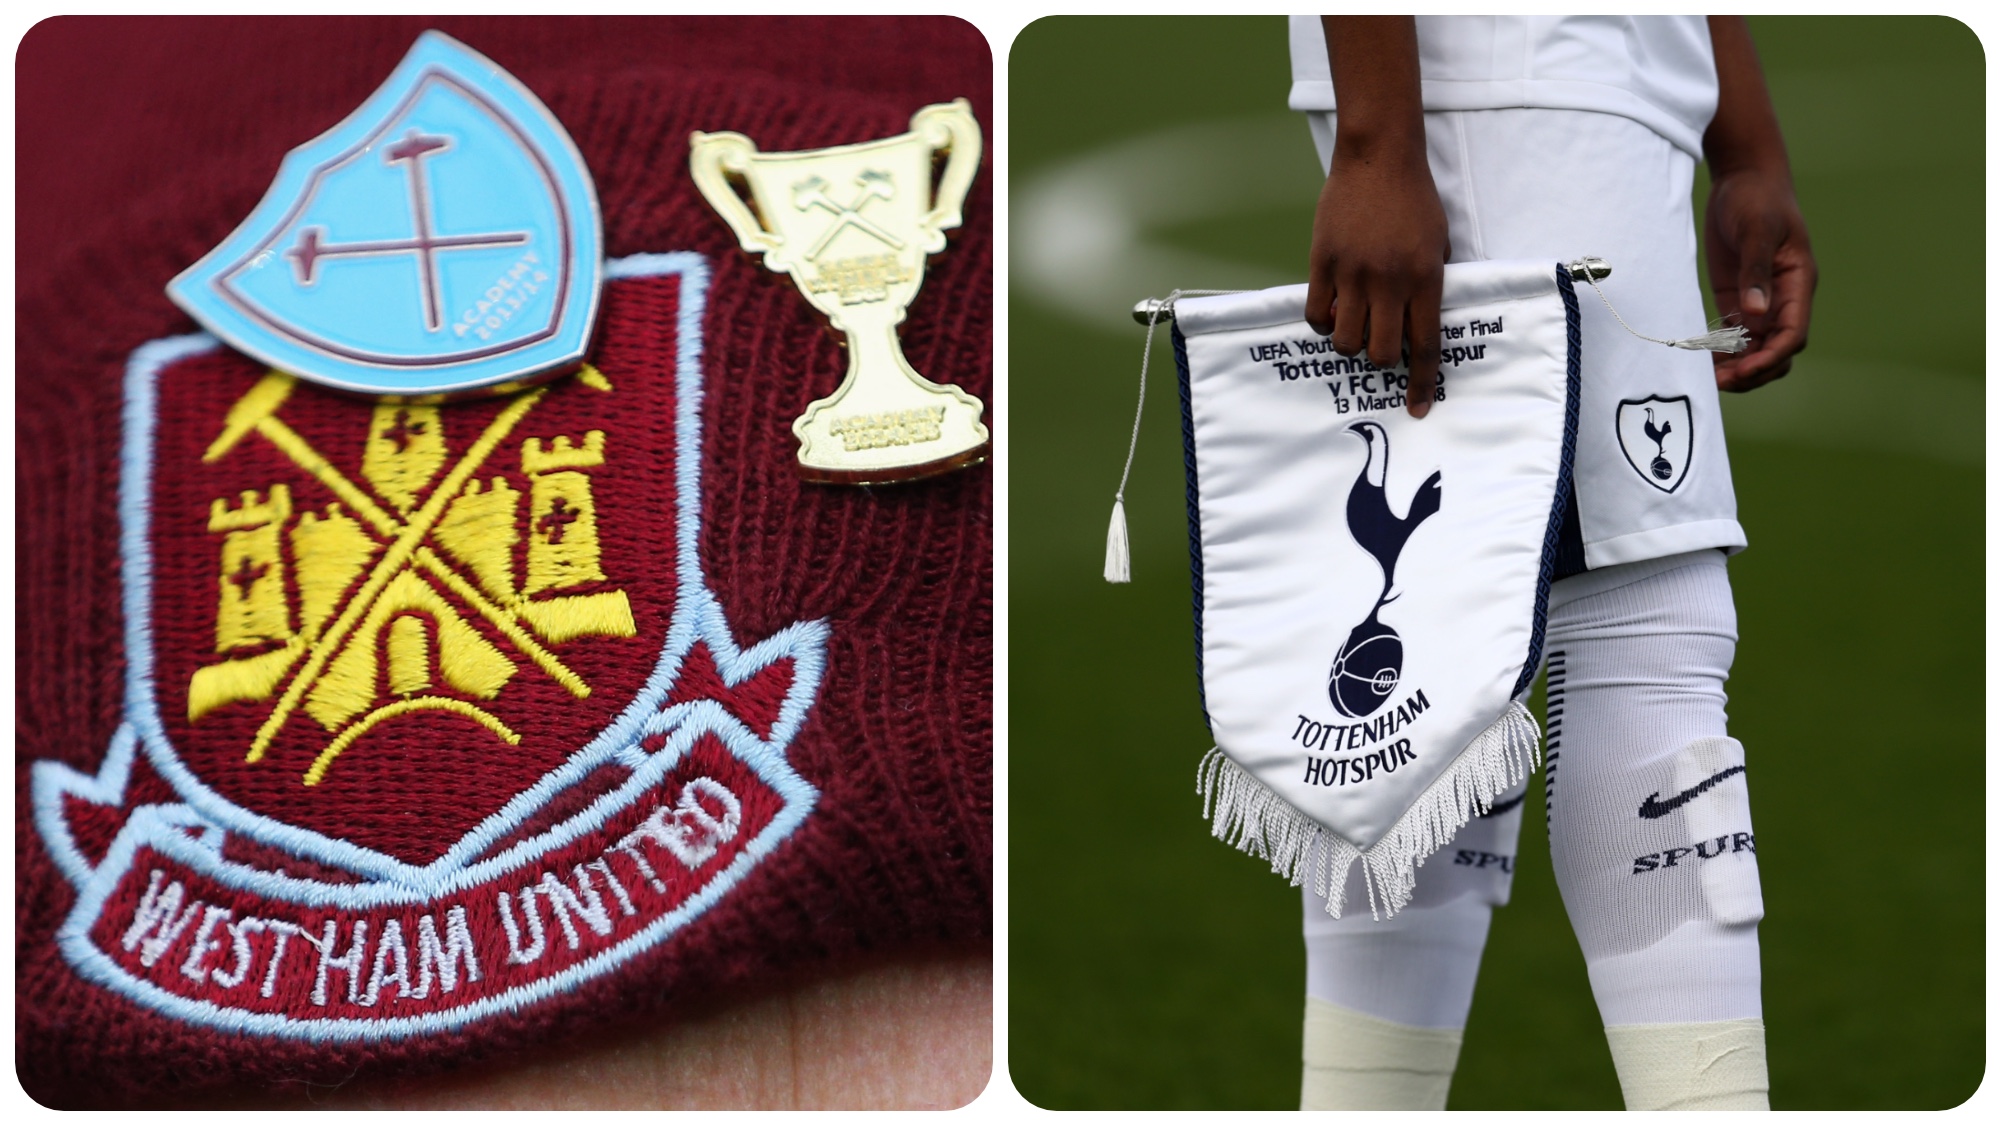 Tottenham v West Ham line-ups: Maddison starts for Spurs and Scamacca only makes the bench for the Hammers CaughtOffside